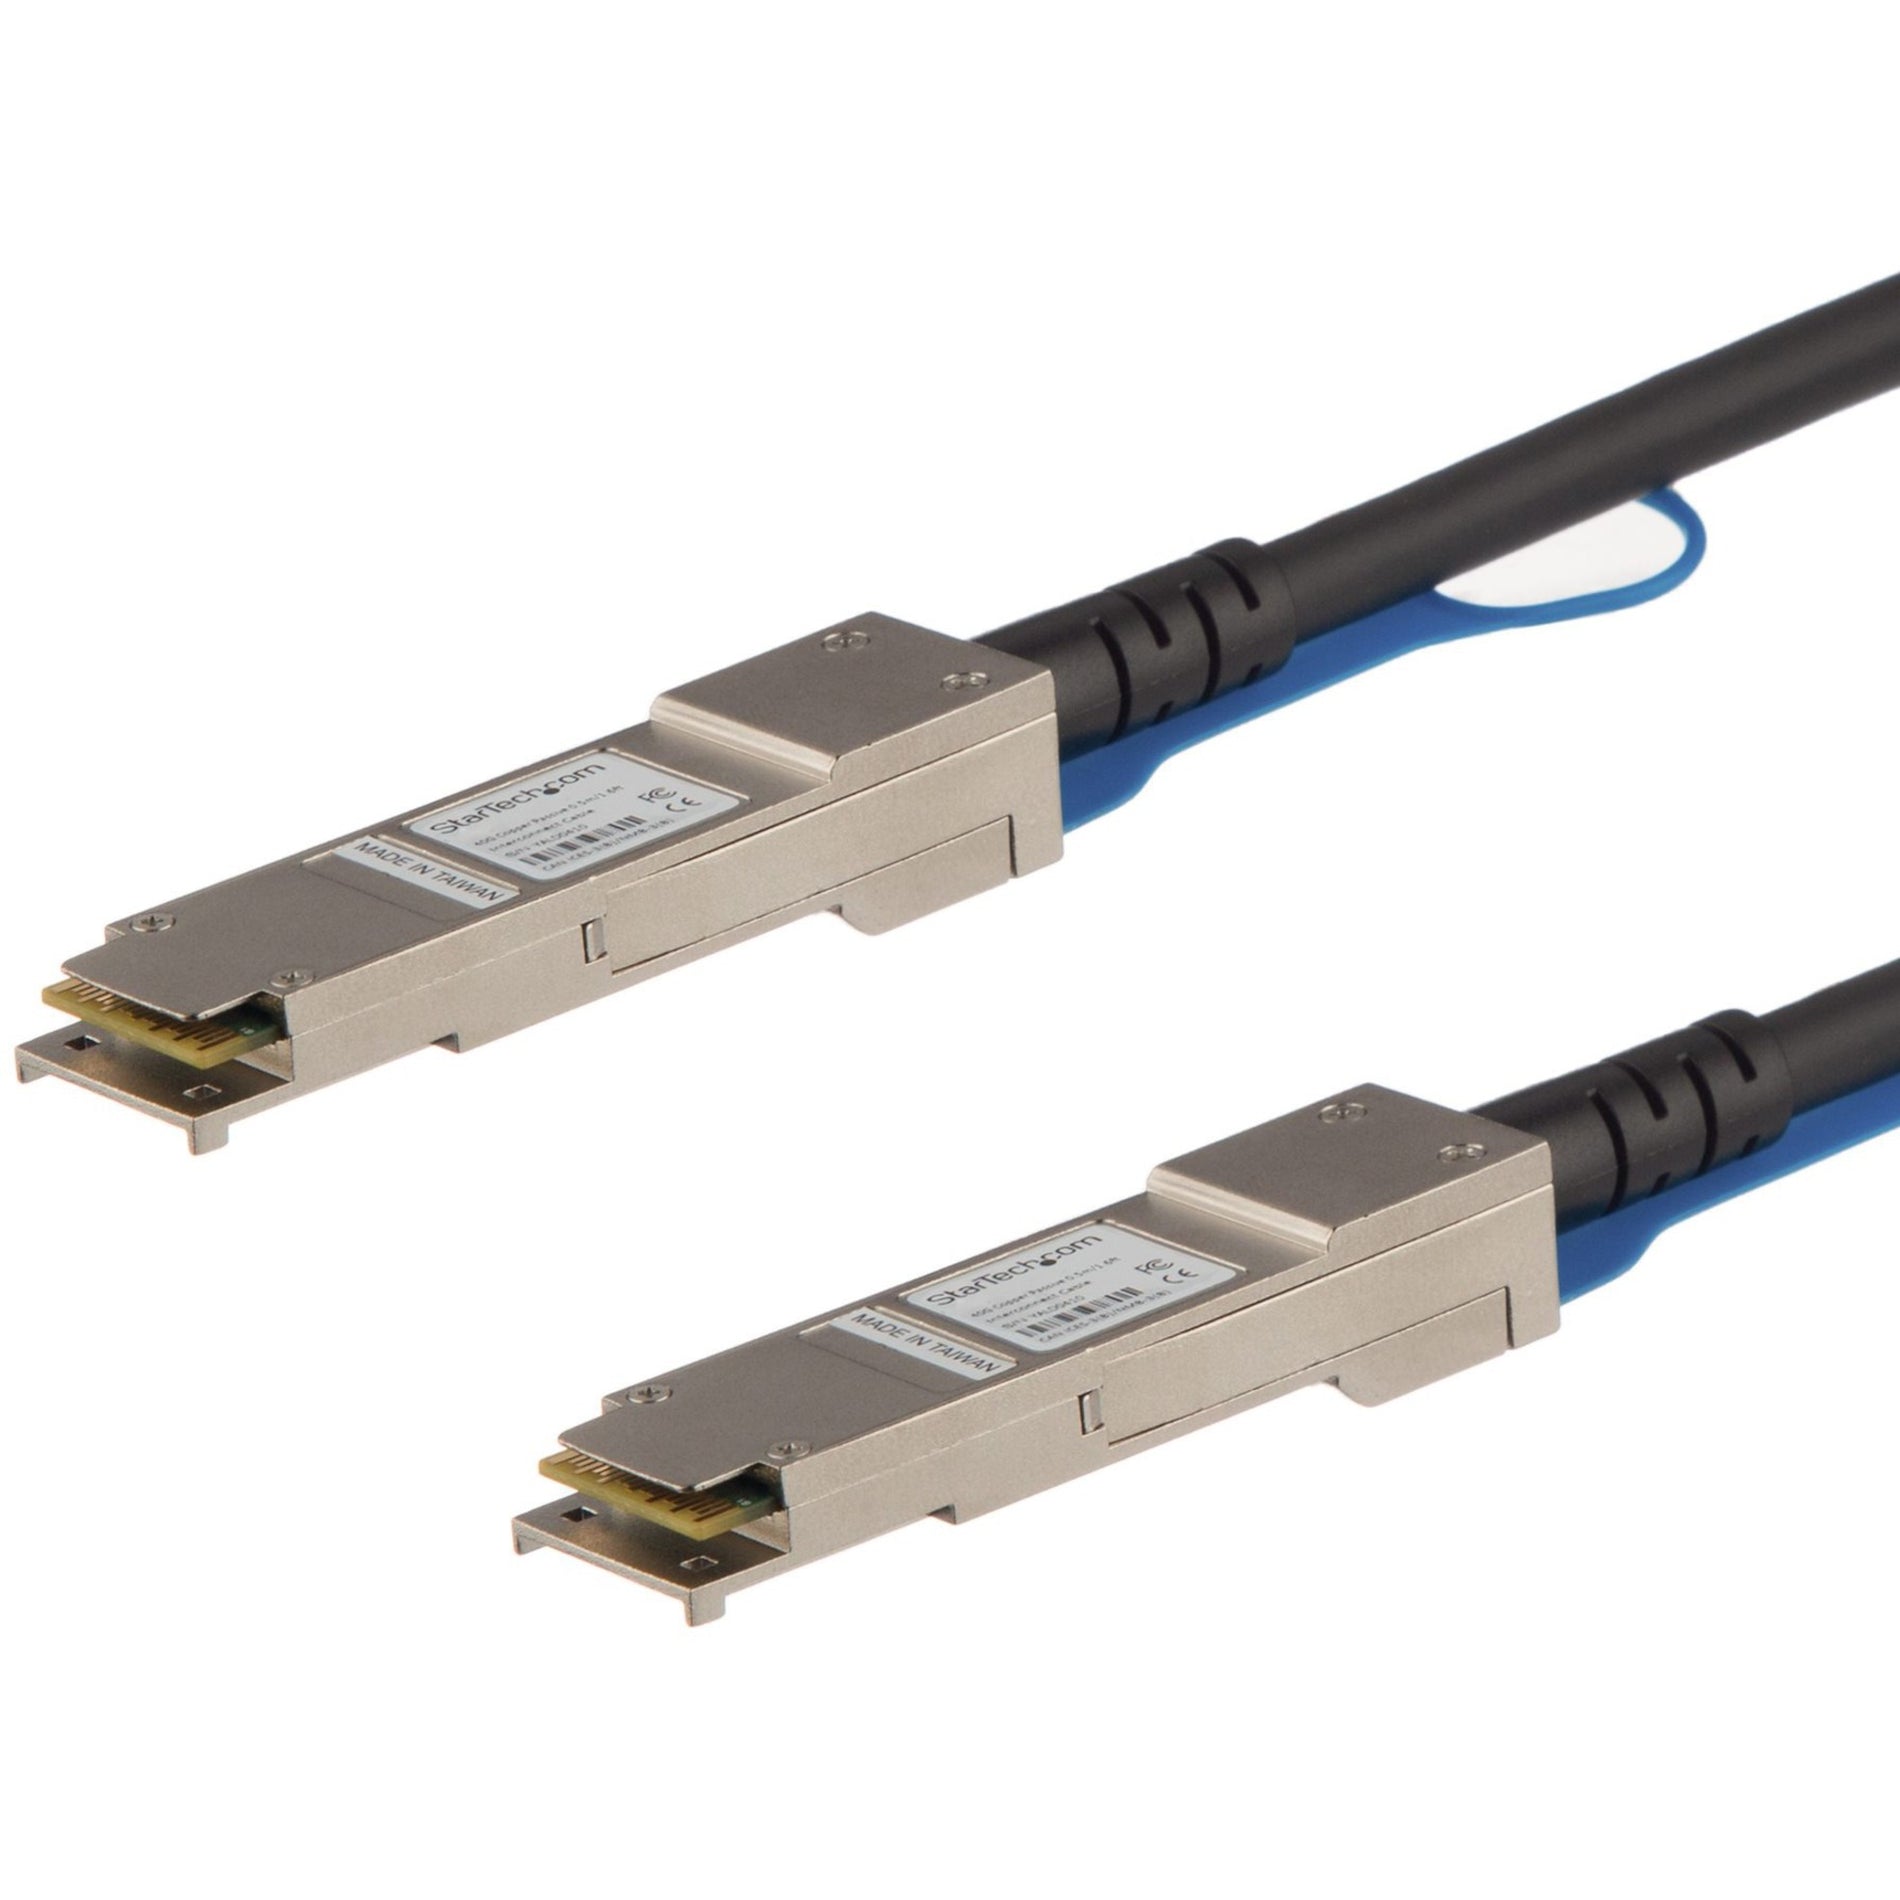 StarTech.com QSFPH40GACU5 QSFP+ Direct Attach Cable - 5 m (16.4 ft.), Active, Hot-swappable, 40 Gbit/s